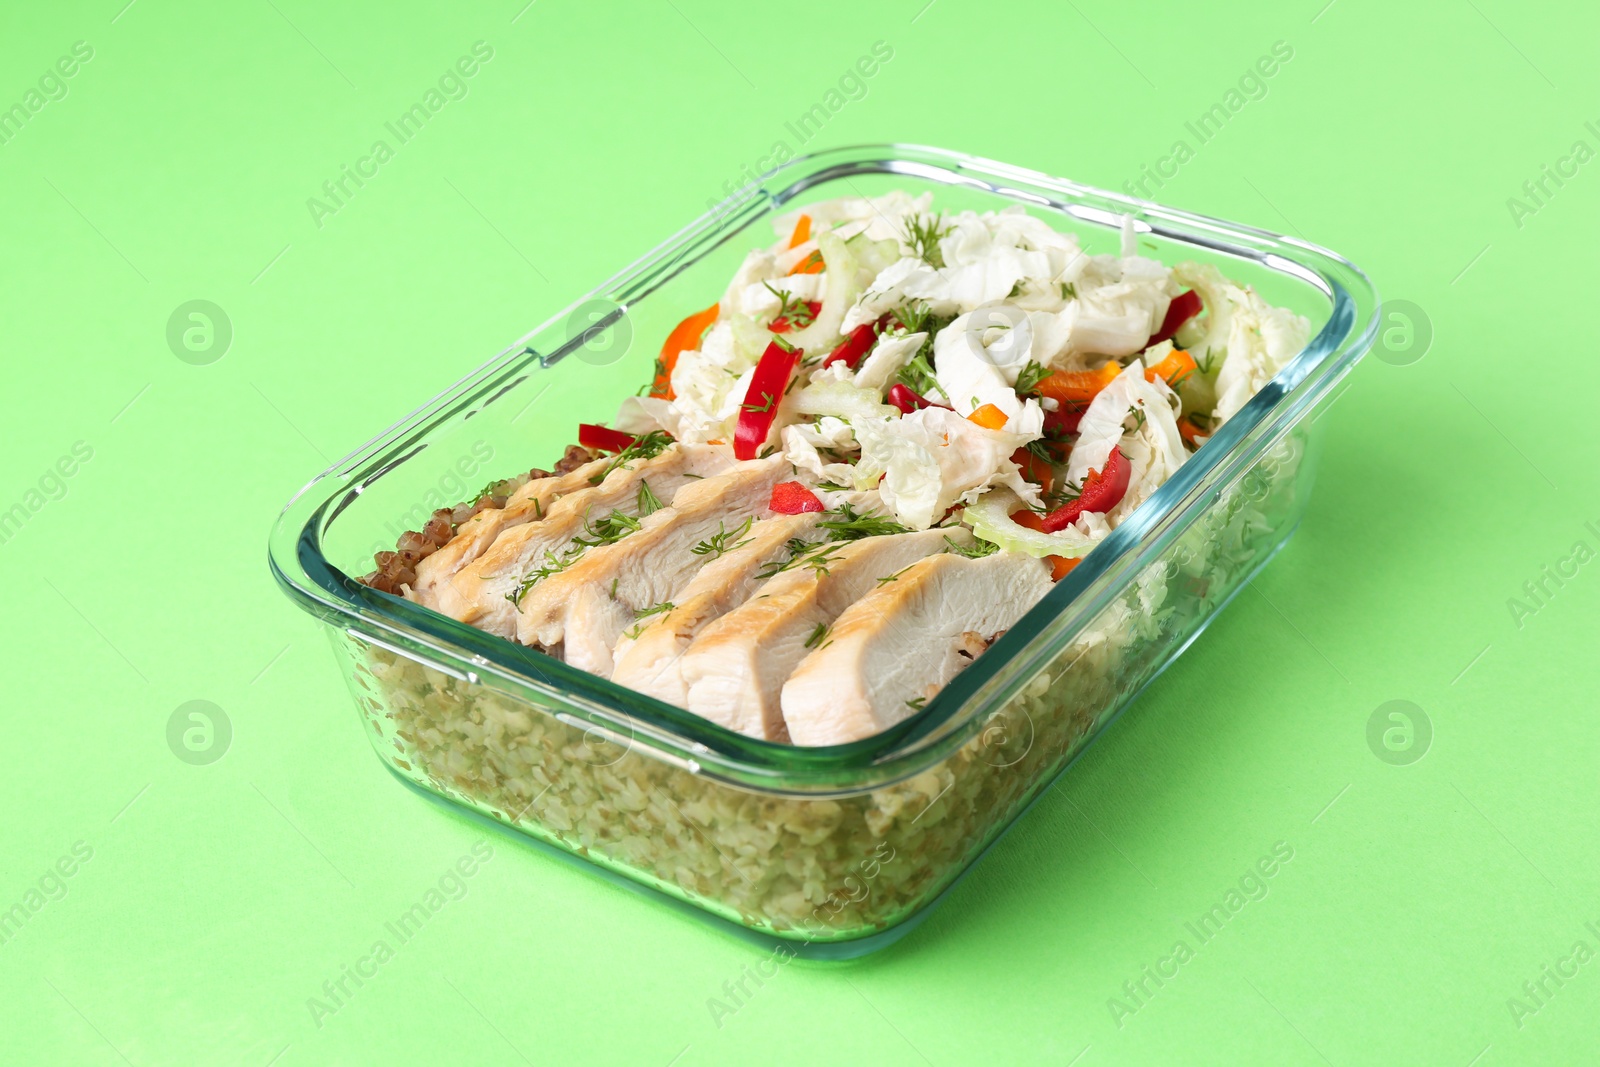 Photo of Healthy meal. Fresh salad, chicken and buckwheat in glass container on green background